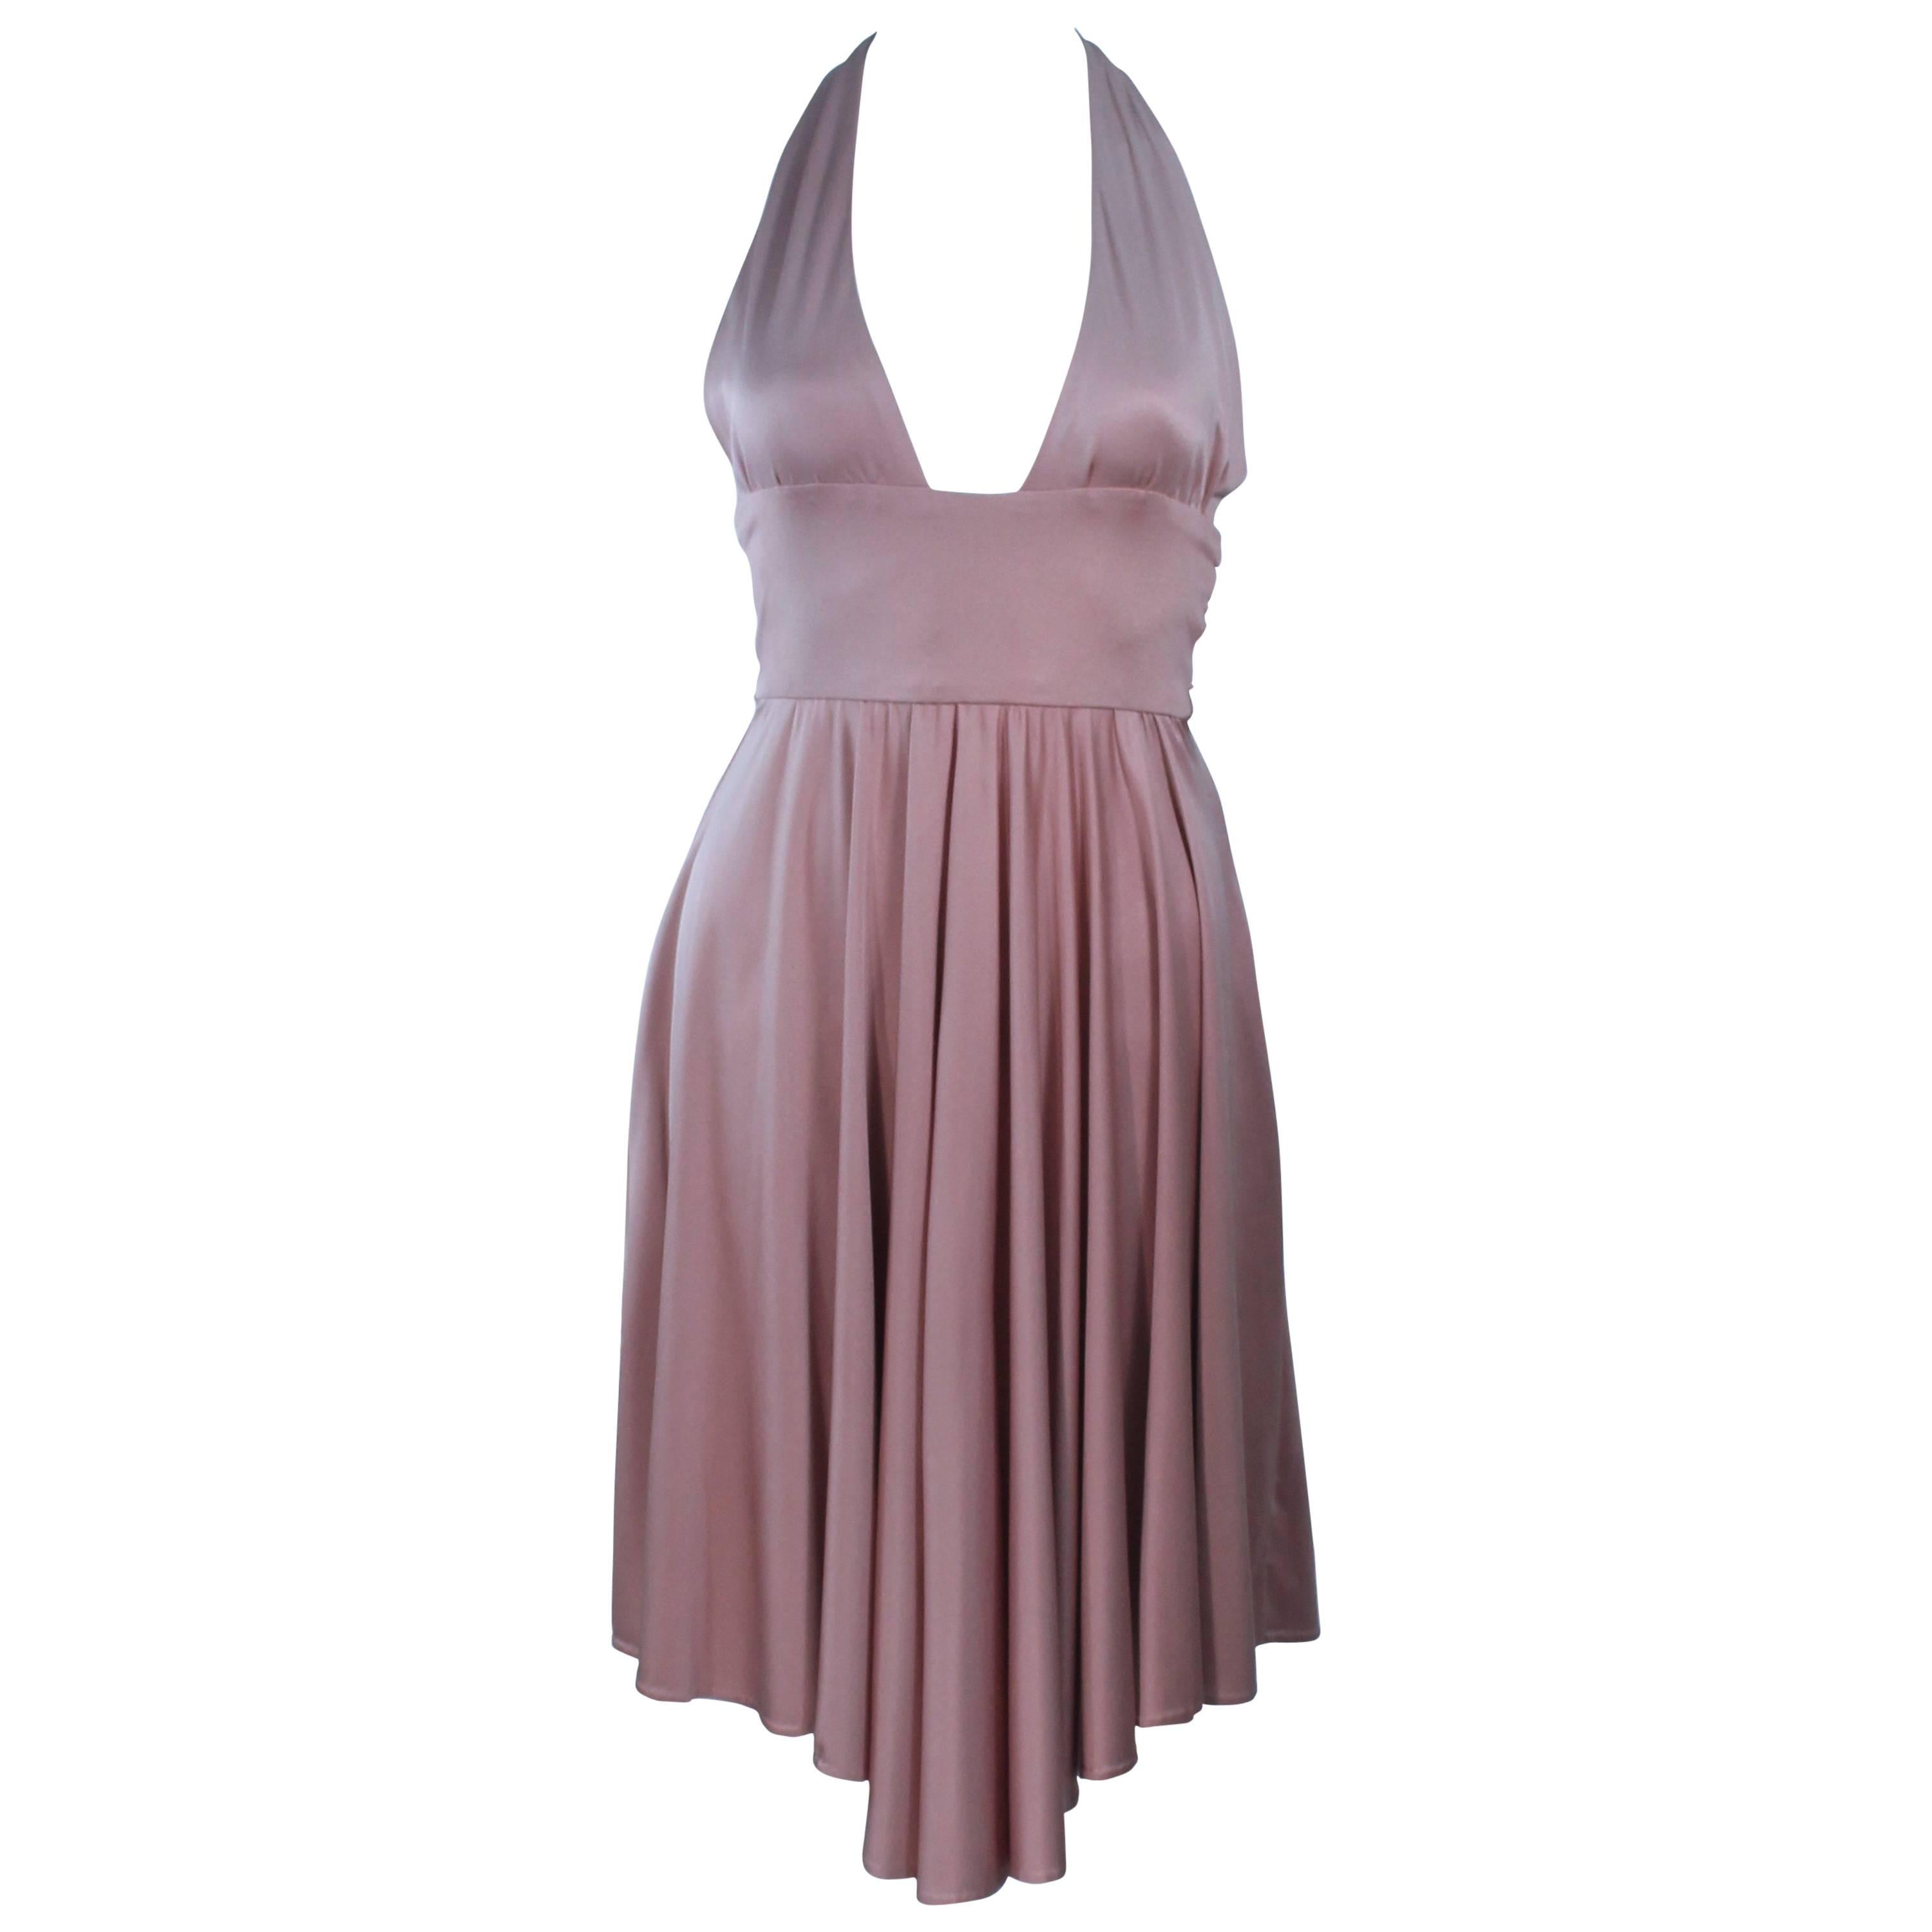 ELIZABETH MASON COUTURE Blush Silk Jersey Halter Cocktail Dress Made To Order For Sale